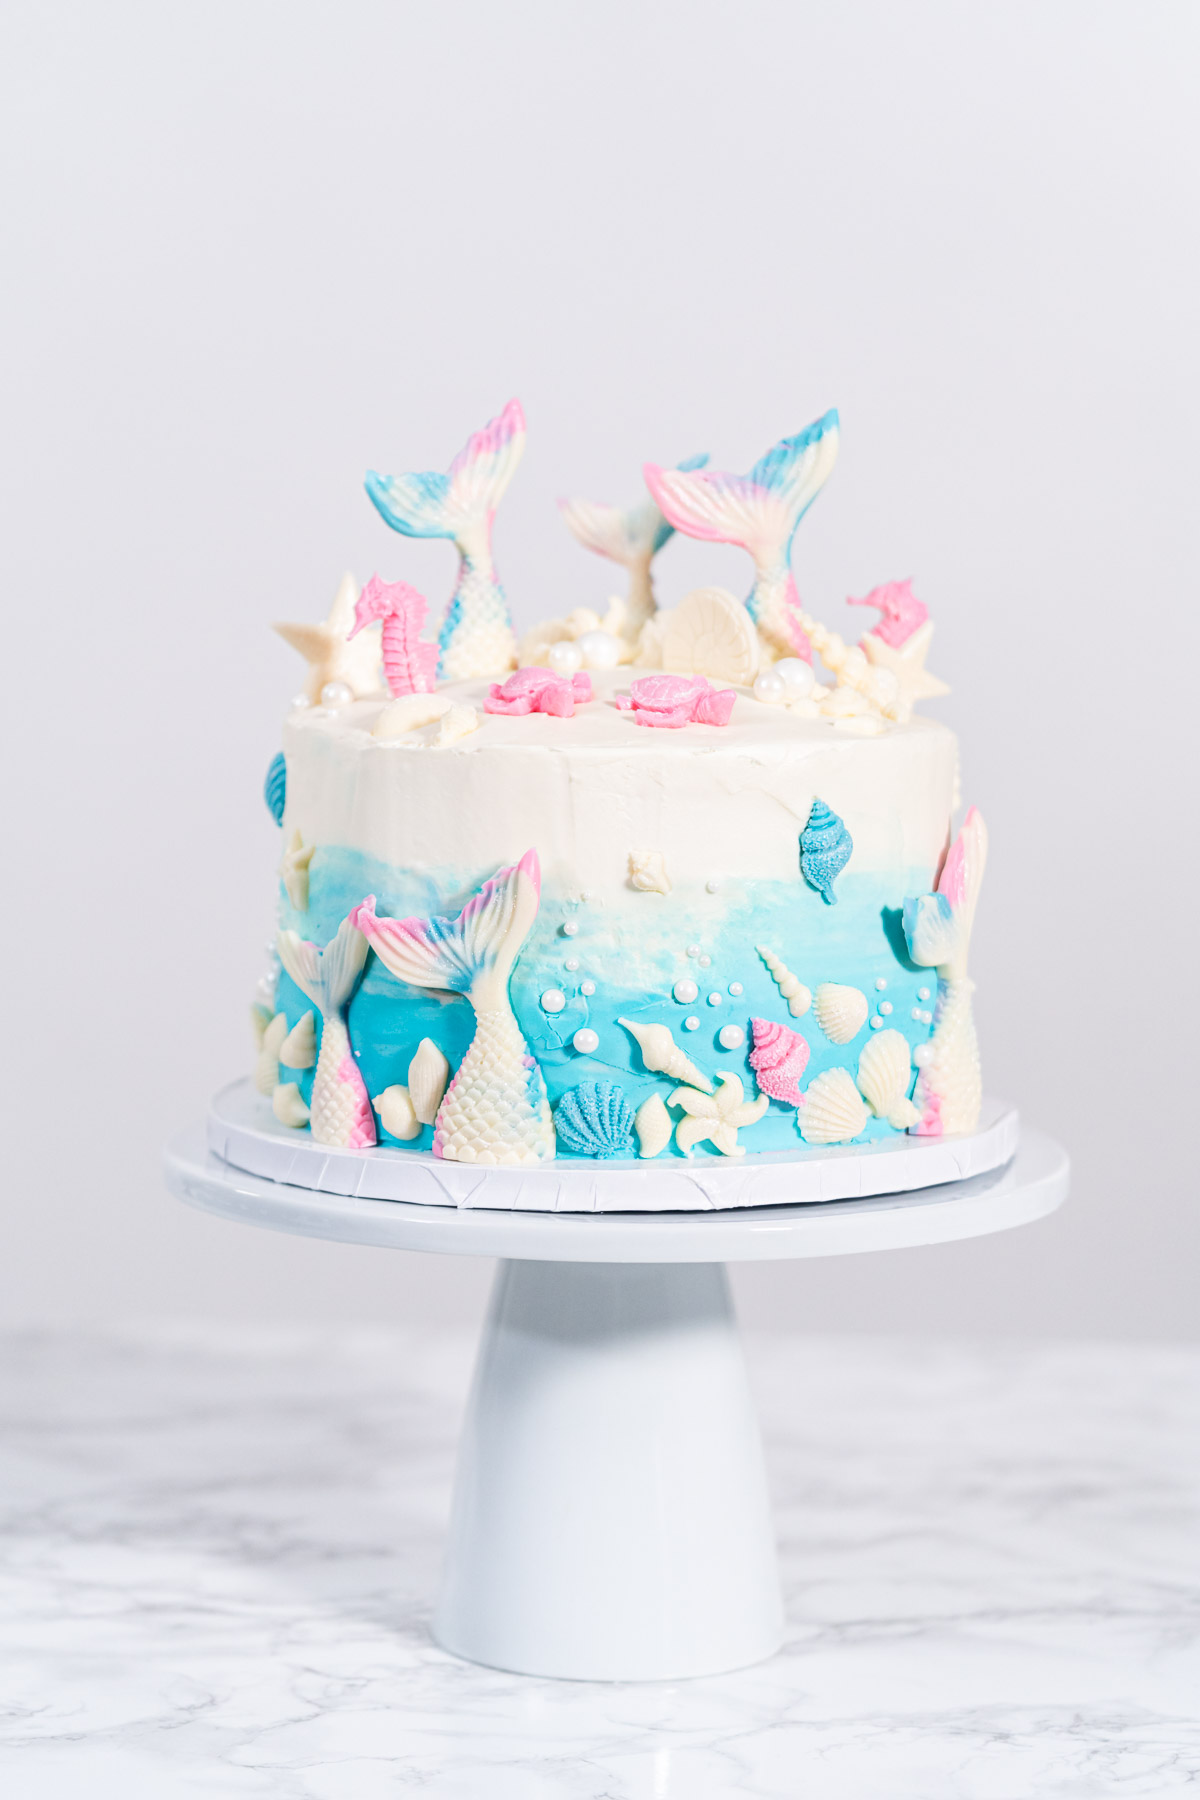 Adorable Smash Cake Ideas for Baby's First Birthday – Home & Hoopla